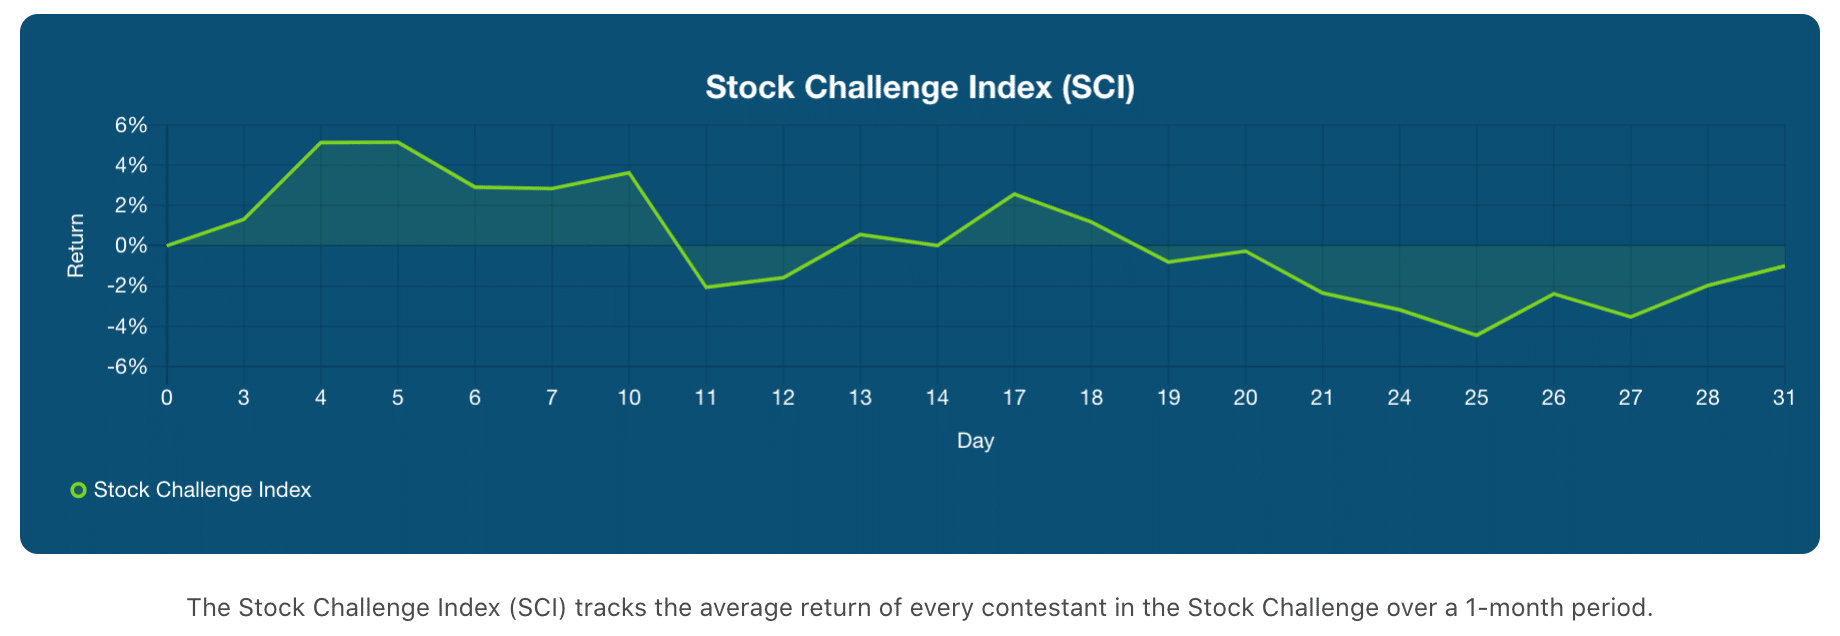 august 2020 final stock challenge index chart